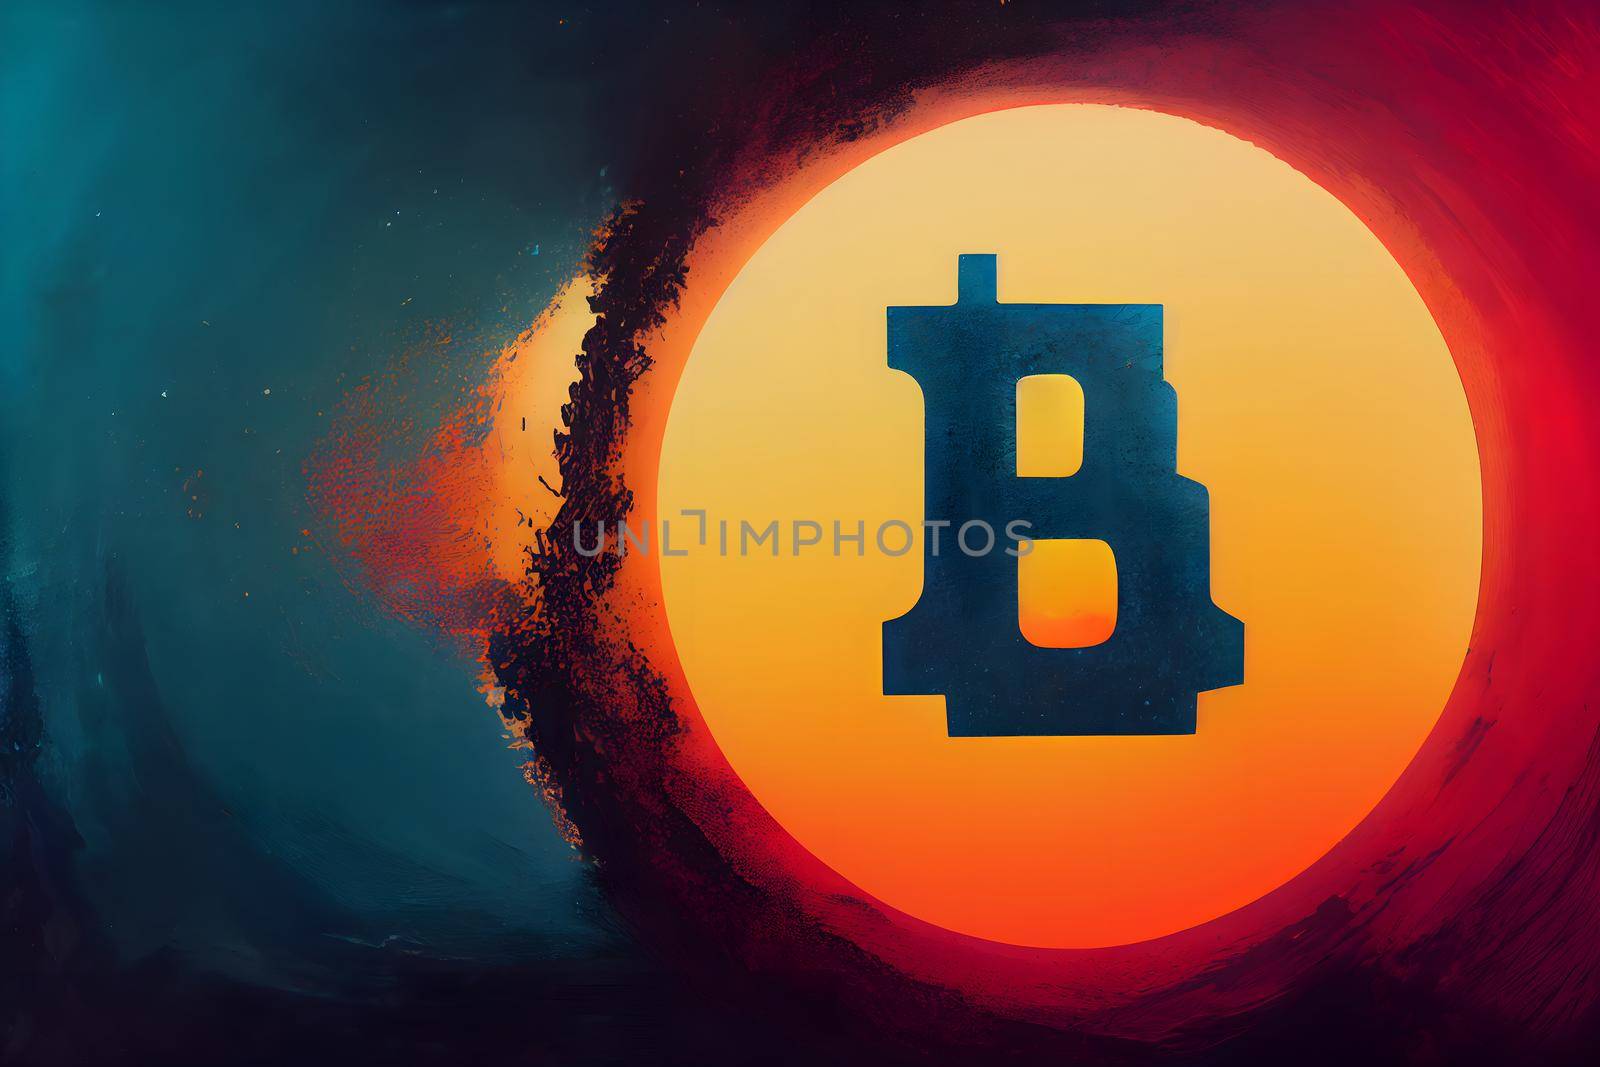 bitcoin sign as black letter B on yellow circle background, neural network generated art. Digitally generated image. Not based on any actual scene or pattern.